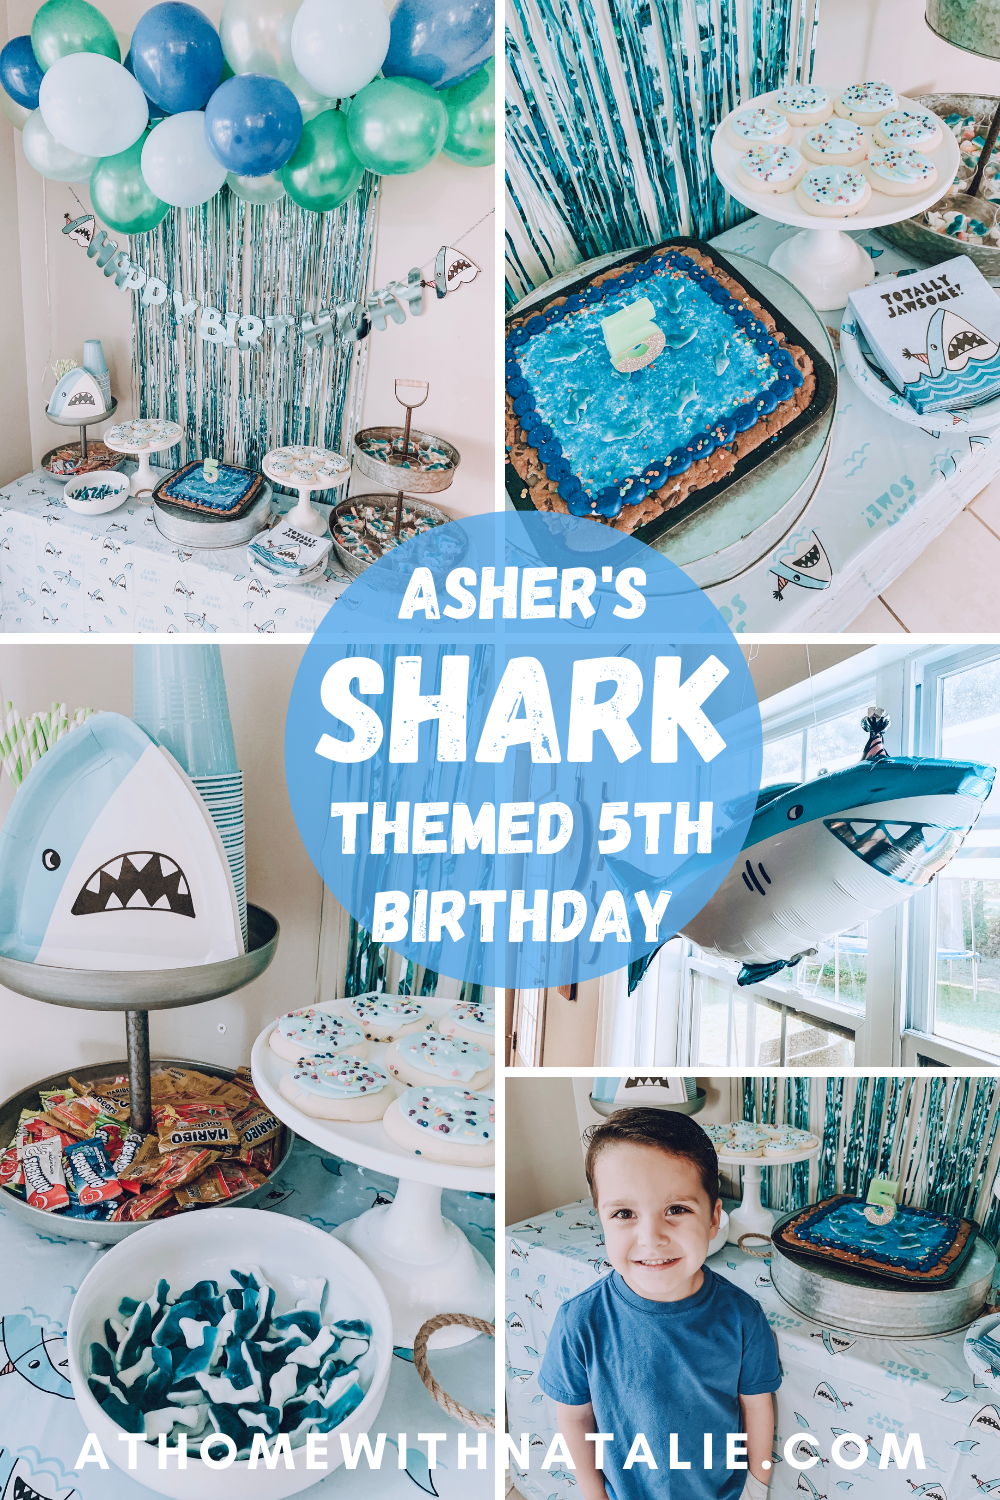 BabyShark birthday Candles or Any themed decorated to your liking